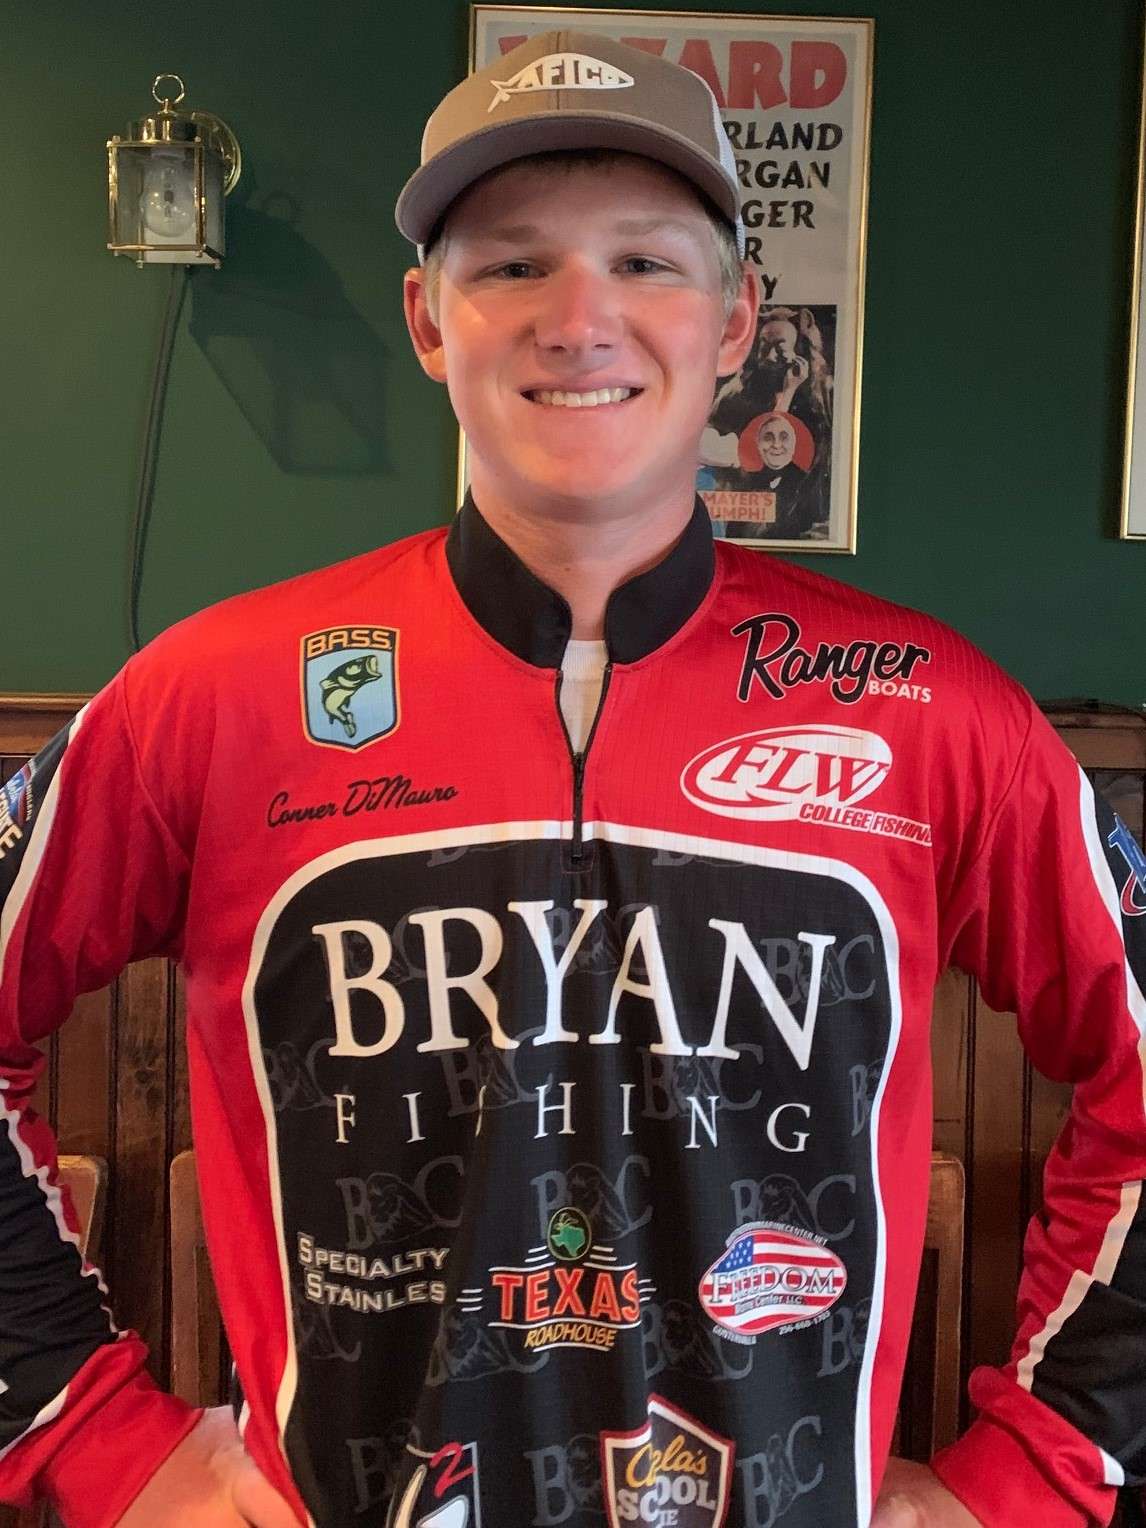 No. 4 seed<BR> Conner Dimauro, Bryan College<BR> Age: 20. Hometown: Longwood, Fla. <BR> Junior, Business Marketing.<BR> Favorite fishing technique: Fishing shallow grass.<BR> Thoughts on Watts Bar: âIâve fished there five or six times, but never in August. Cole and I have fished a few tournaments there. Itâs going to be tough and a kicker fish is going to be huge in your bag.â<BR> Weight to advance: â14 pounds.â<BR> What would it mean to advance to the Bassmaster Classic? âItâs been a dream of mine ever since I can remember, to walk across that stage. It would be such a cool experience to get to fish against the people I look up toâ¦It also set up my fishing career down the road by giving me exposure and experience at the highest level.â